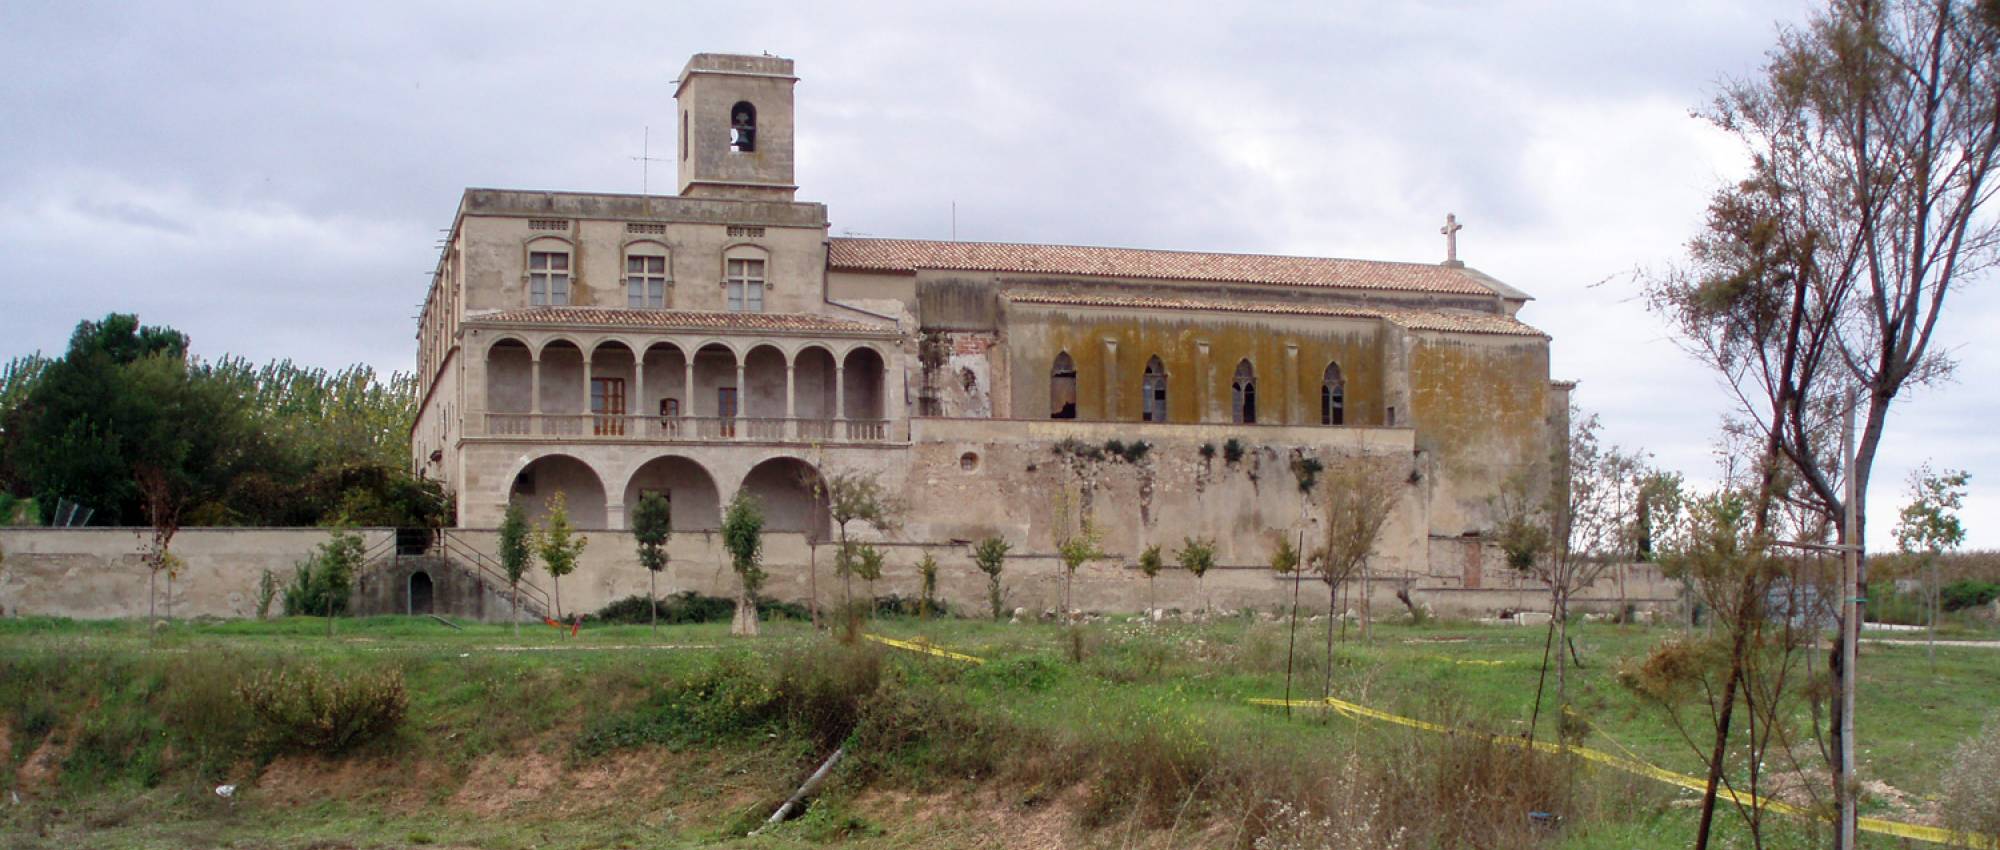 General view of the Castle of Sant Bartomeu. J.Gomà / Wikimedia Commons. CC BY 3.0